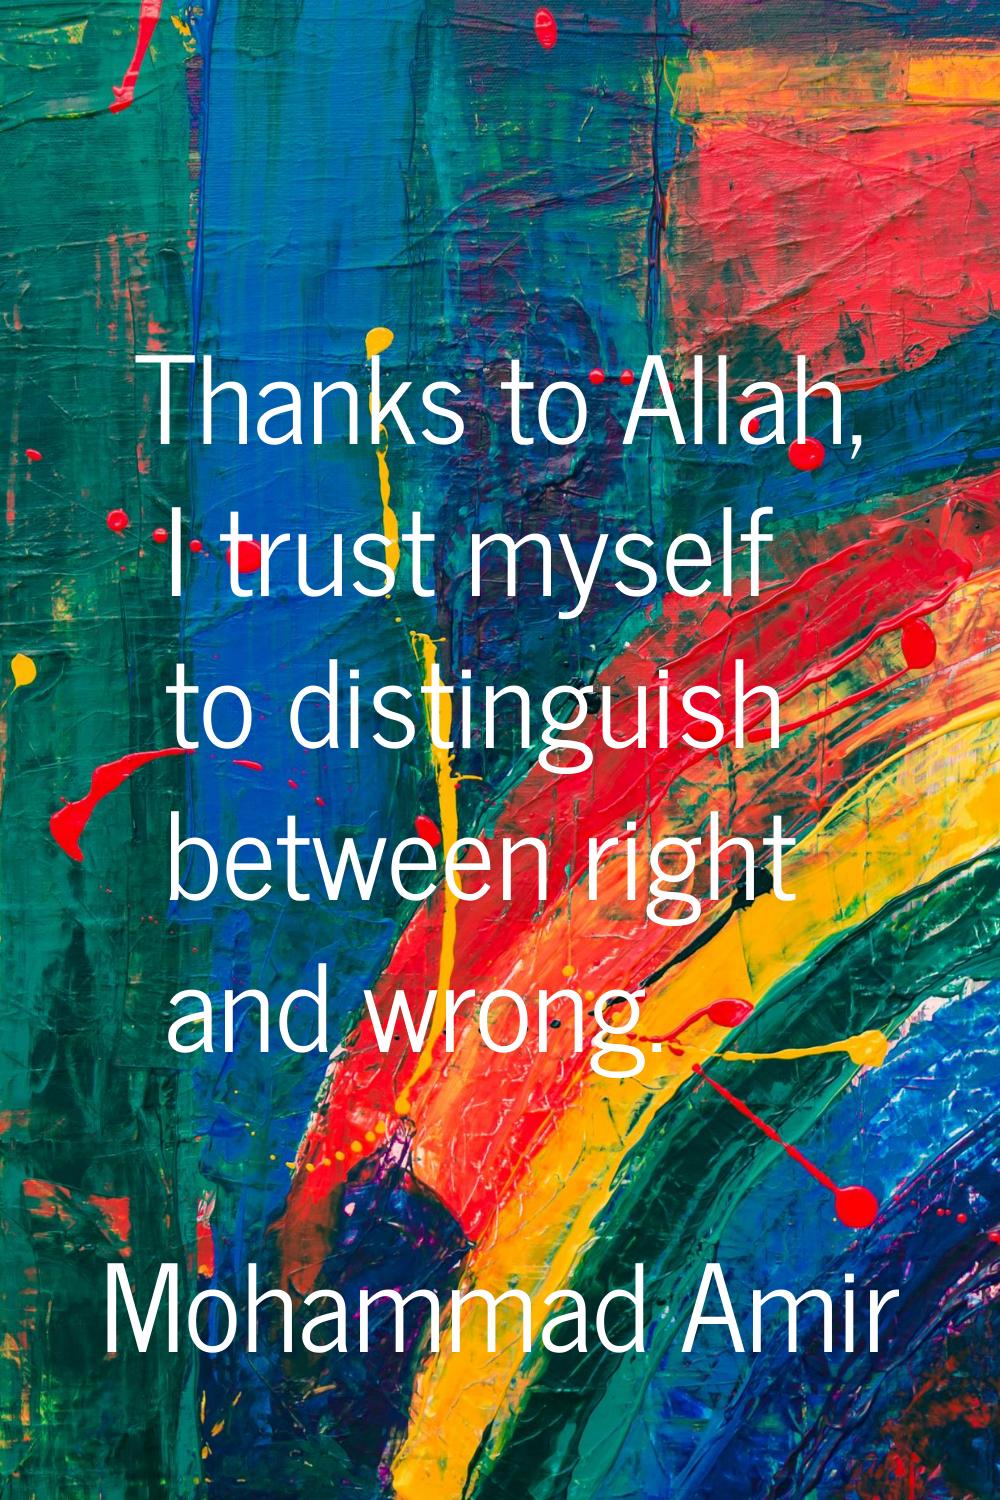 Thanks to Allah, I trust myself to distinguish between right and wrong.